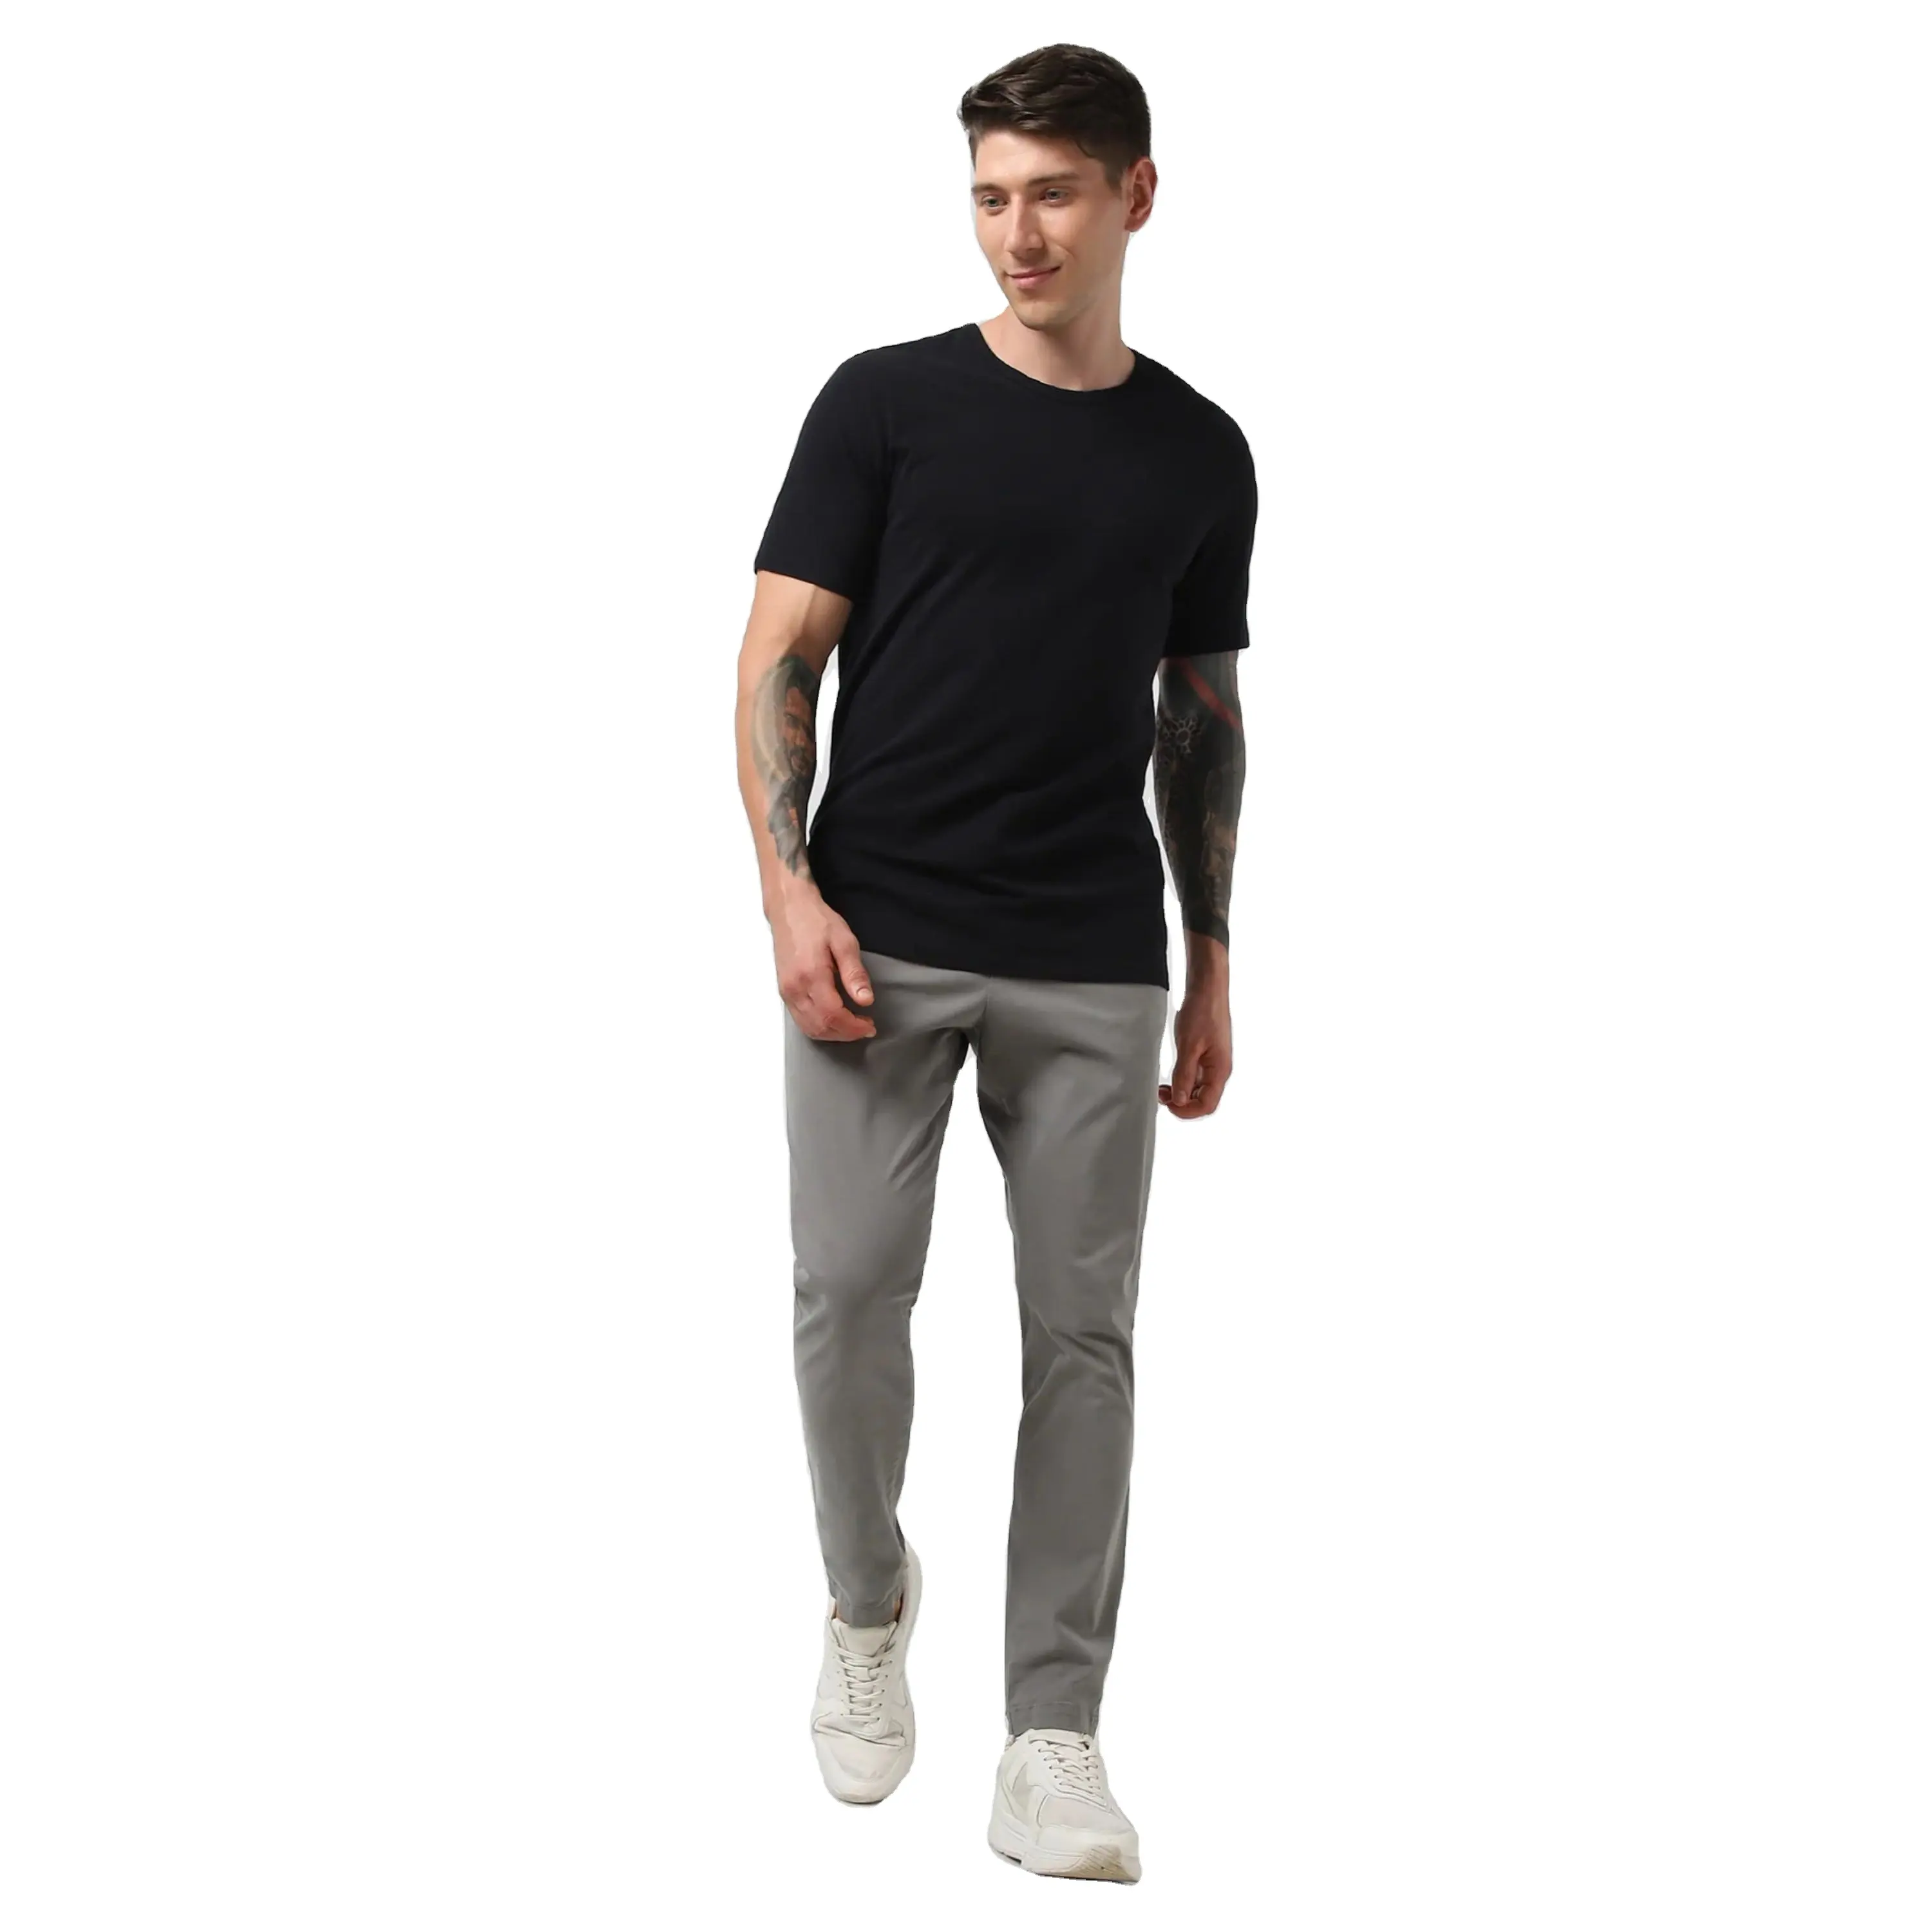 Stylish Men's Longline Curved Hem Tee - Slim Fit, Trendy Layering Piece for Urban Street Fashion, Available in Earth Tones